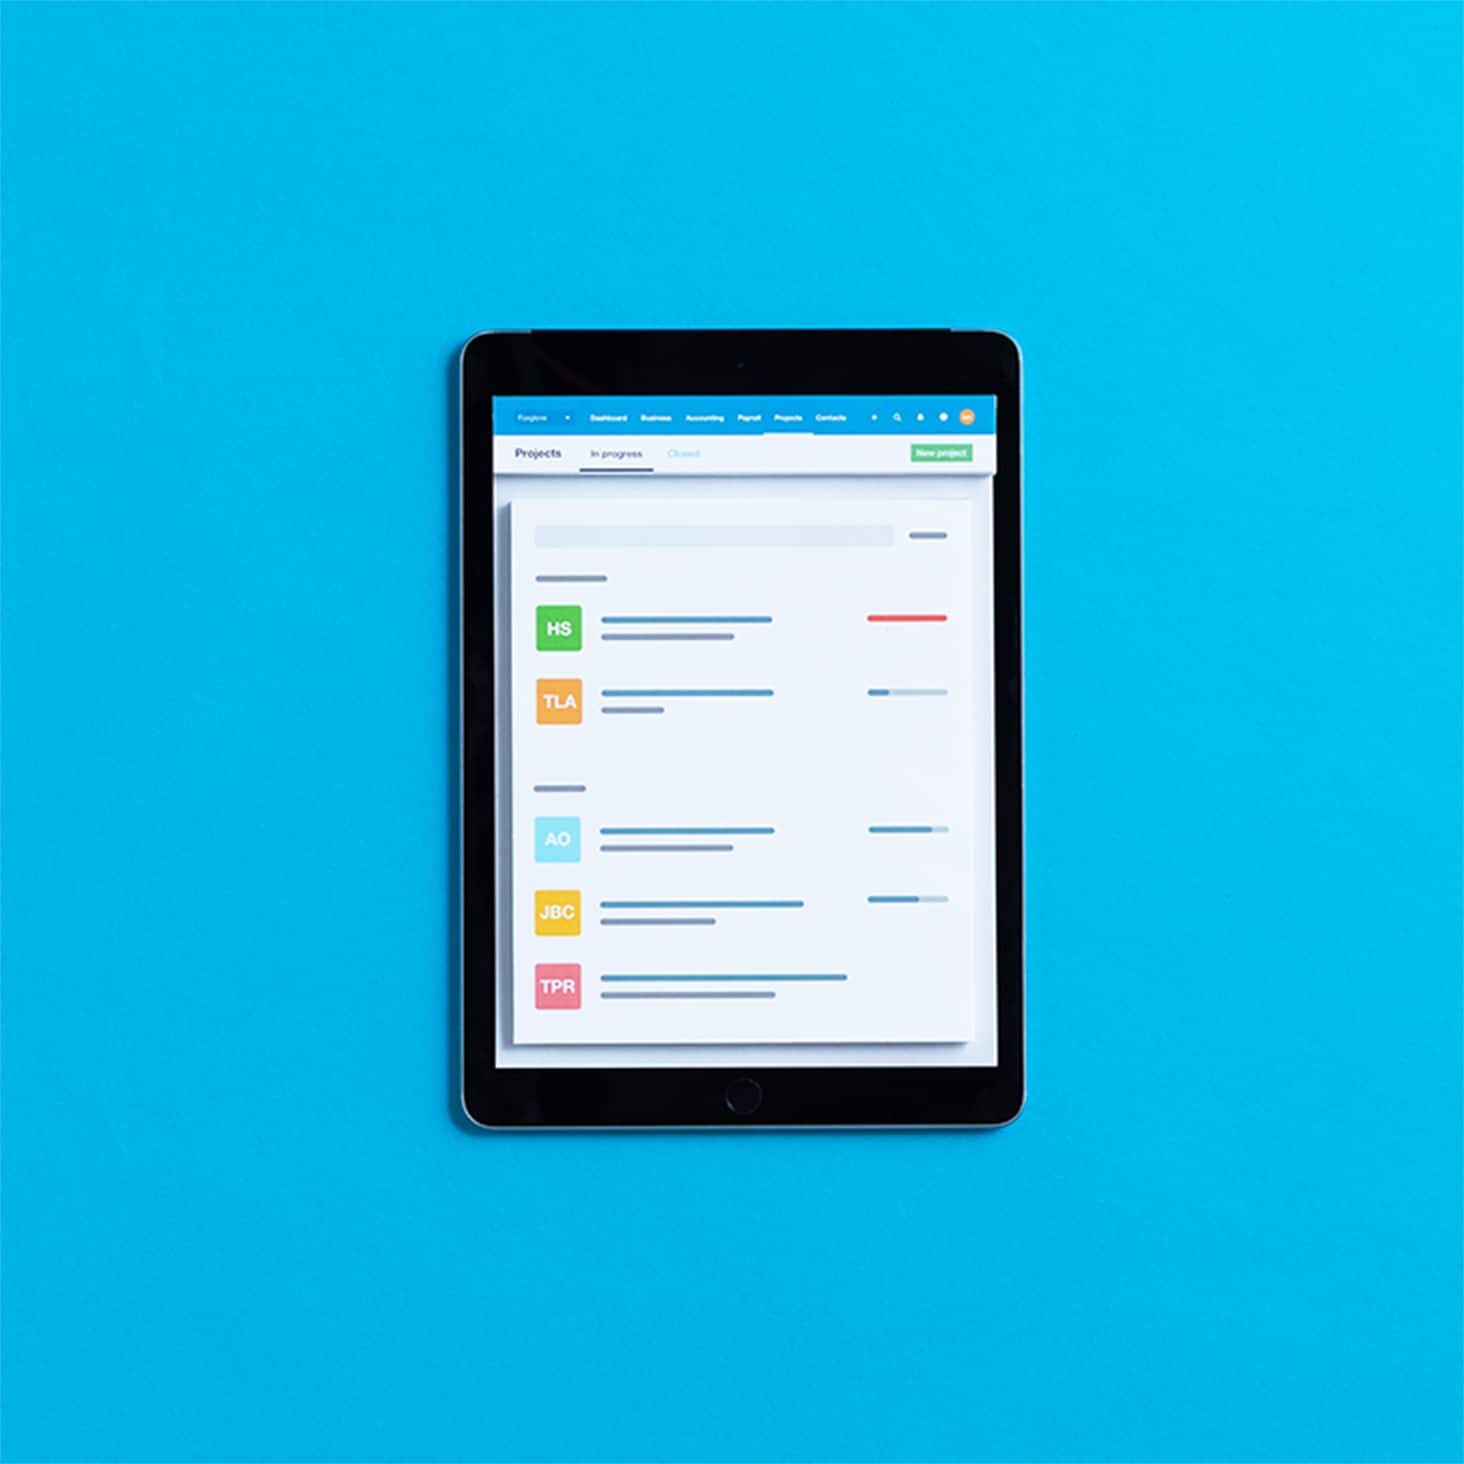 Xero’s project software in progress displayed on a tablet.